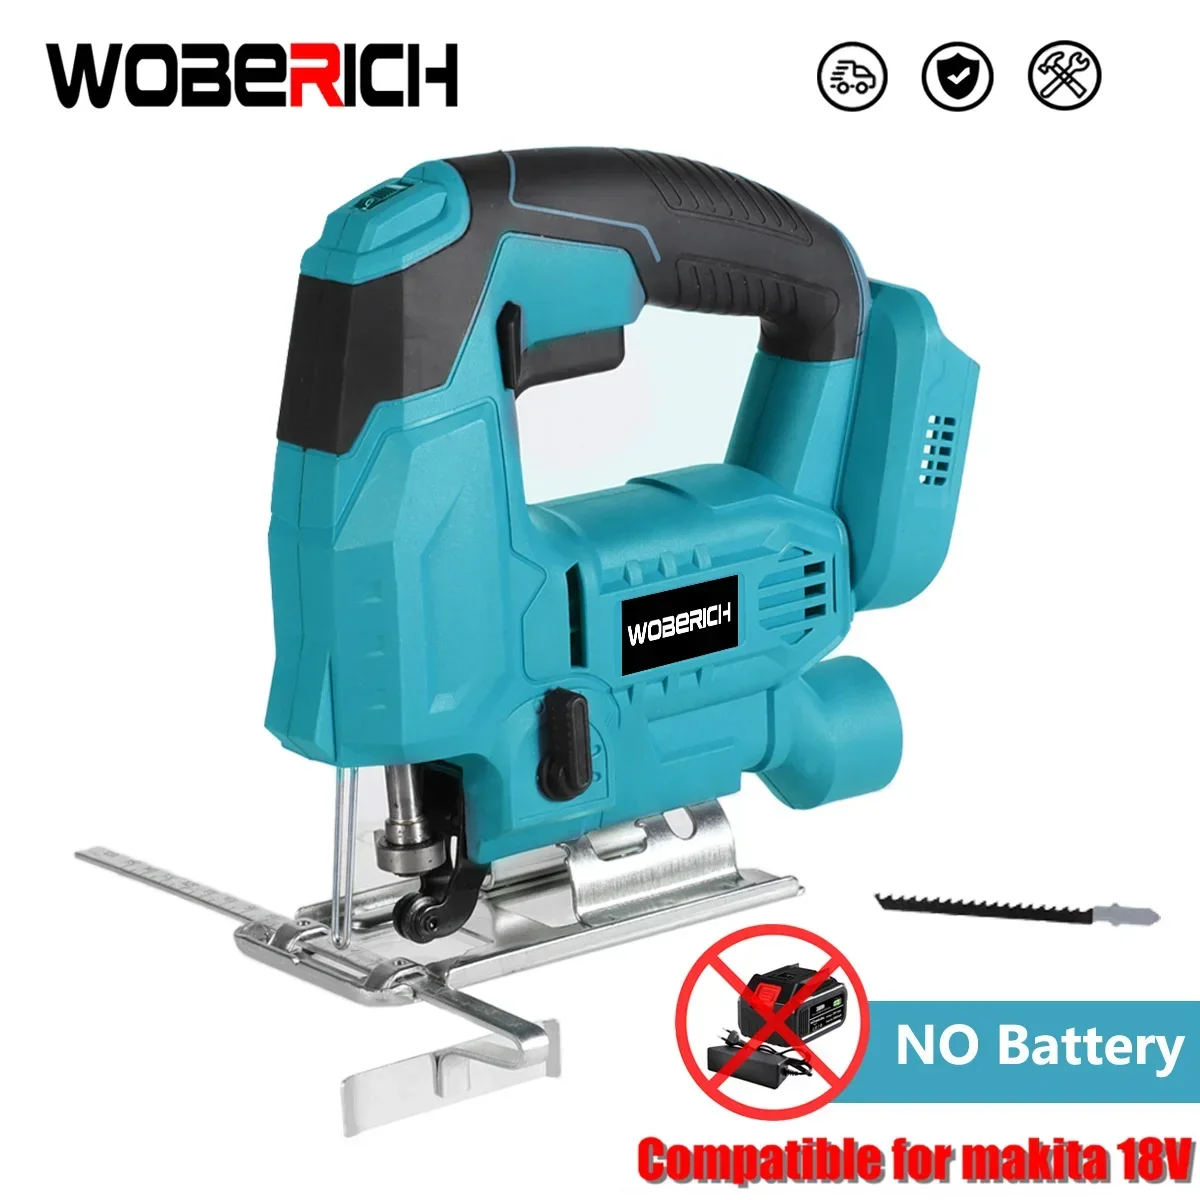 65mm 18V Cordless Jigsaw Electric Jig Saw Blade Adjustable Woodworking LED 6 Gear Speed Power Tool for Makita 18V Battery 18v 65mm 3000rpm brushless electric curved saw cordless jigsaw 3 variable speed multifunctional electric tool for makita battery